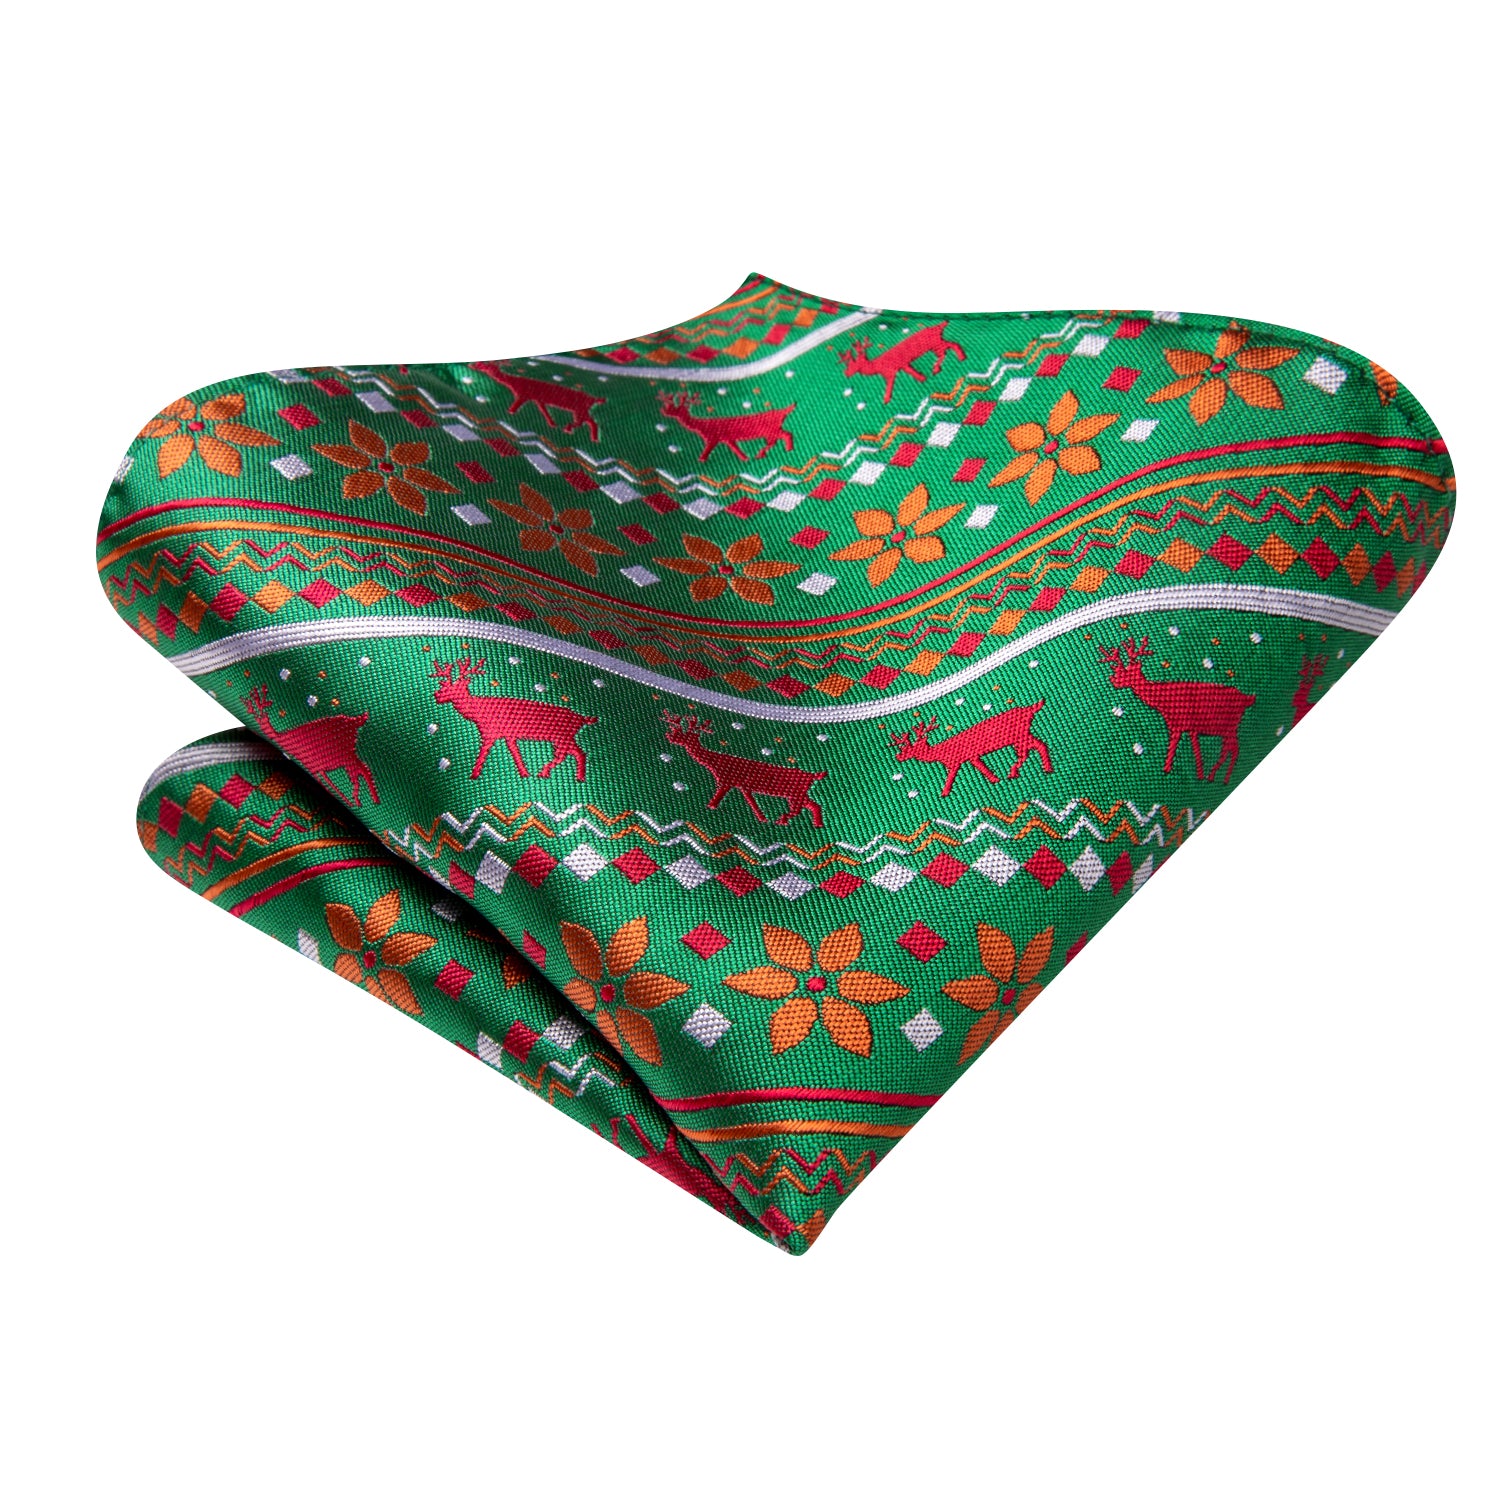 Green Red Christmas Novelty Self-tied Bow Tie Hanky Cufflinks Set